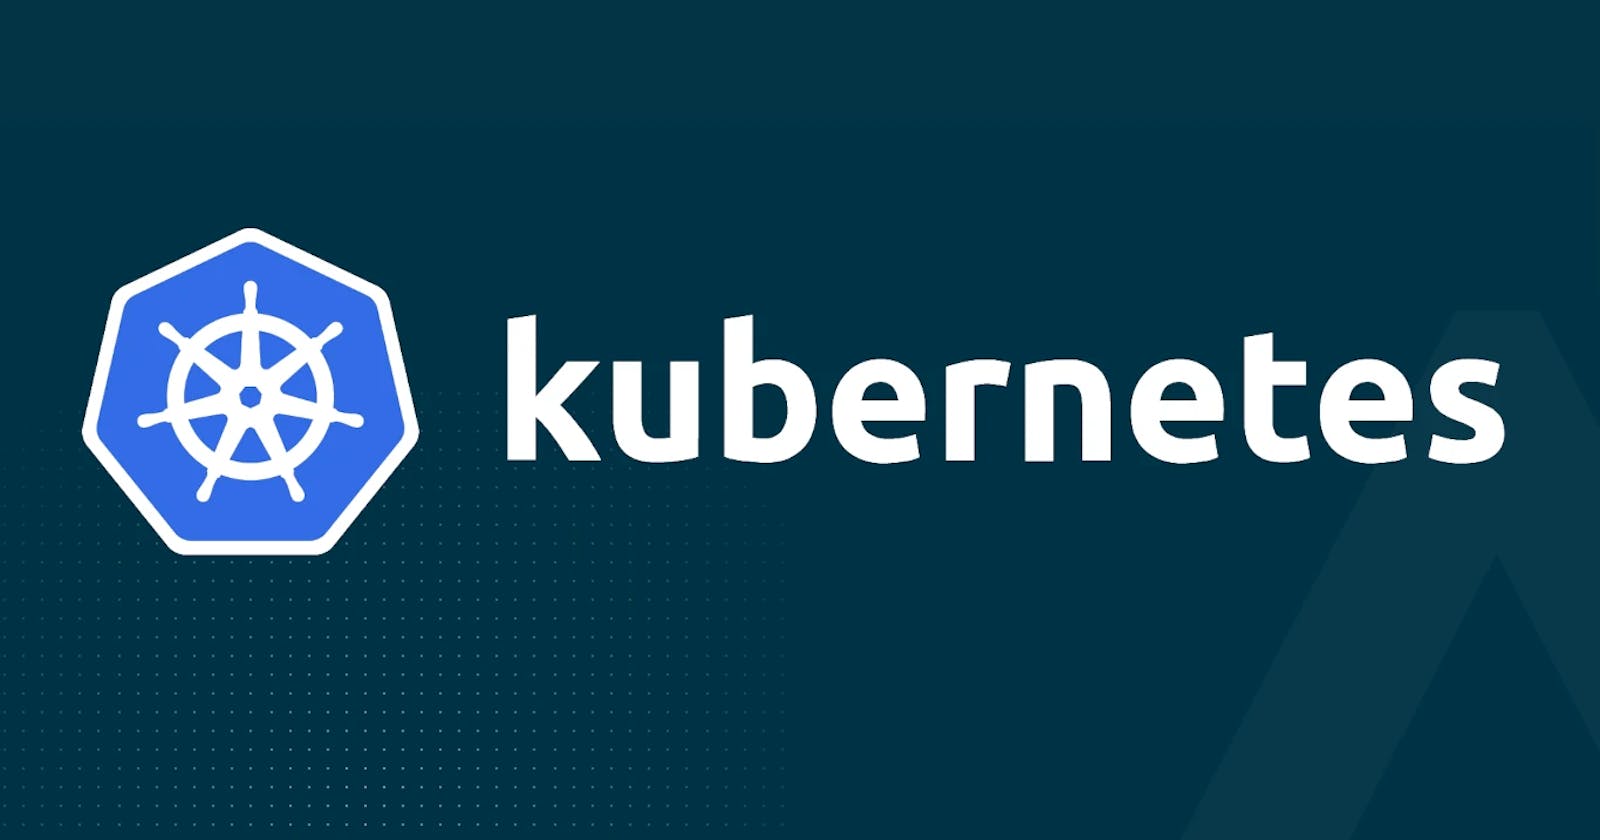 What is Kubernetes? Why do developers use Kubernetes for DevOps?